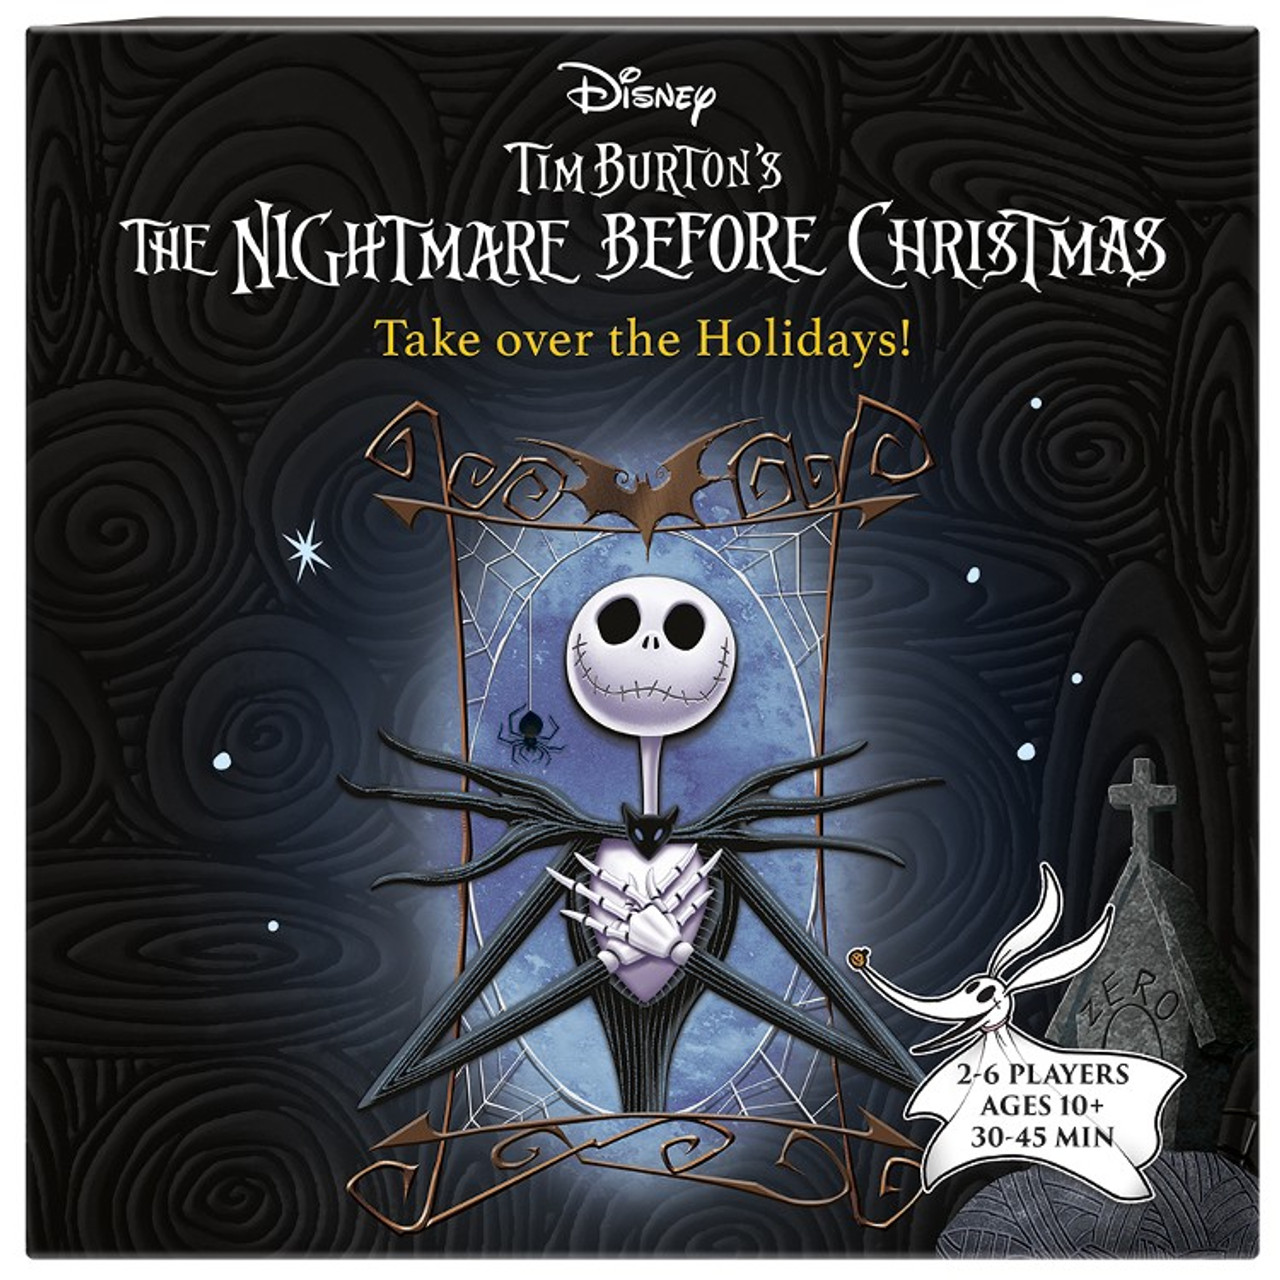 The Nightmare Before Christmas: Take Over the Holidays